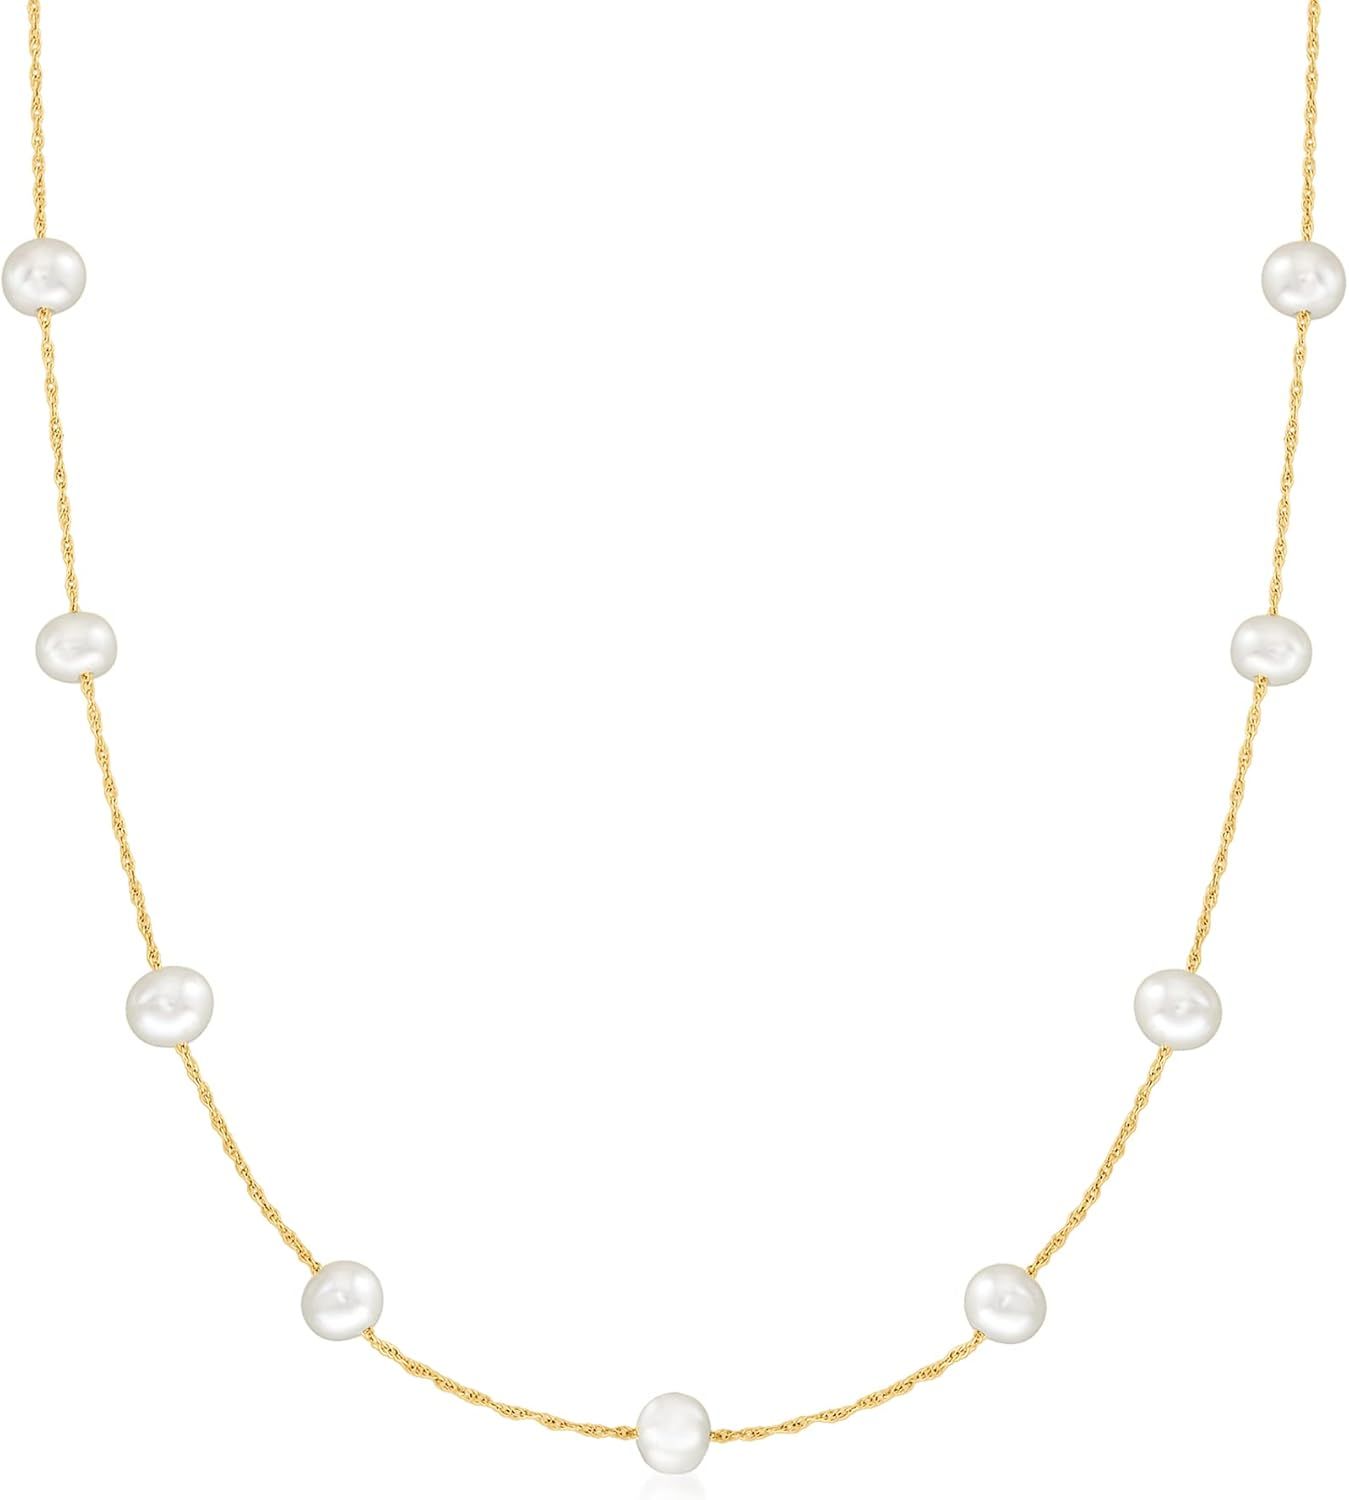 Ross-Simons 5-5.5mm Cultured Pearl Station Necklace in 14kt Yellow Gold | Amazon (US)